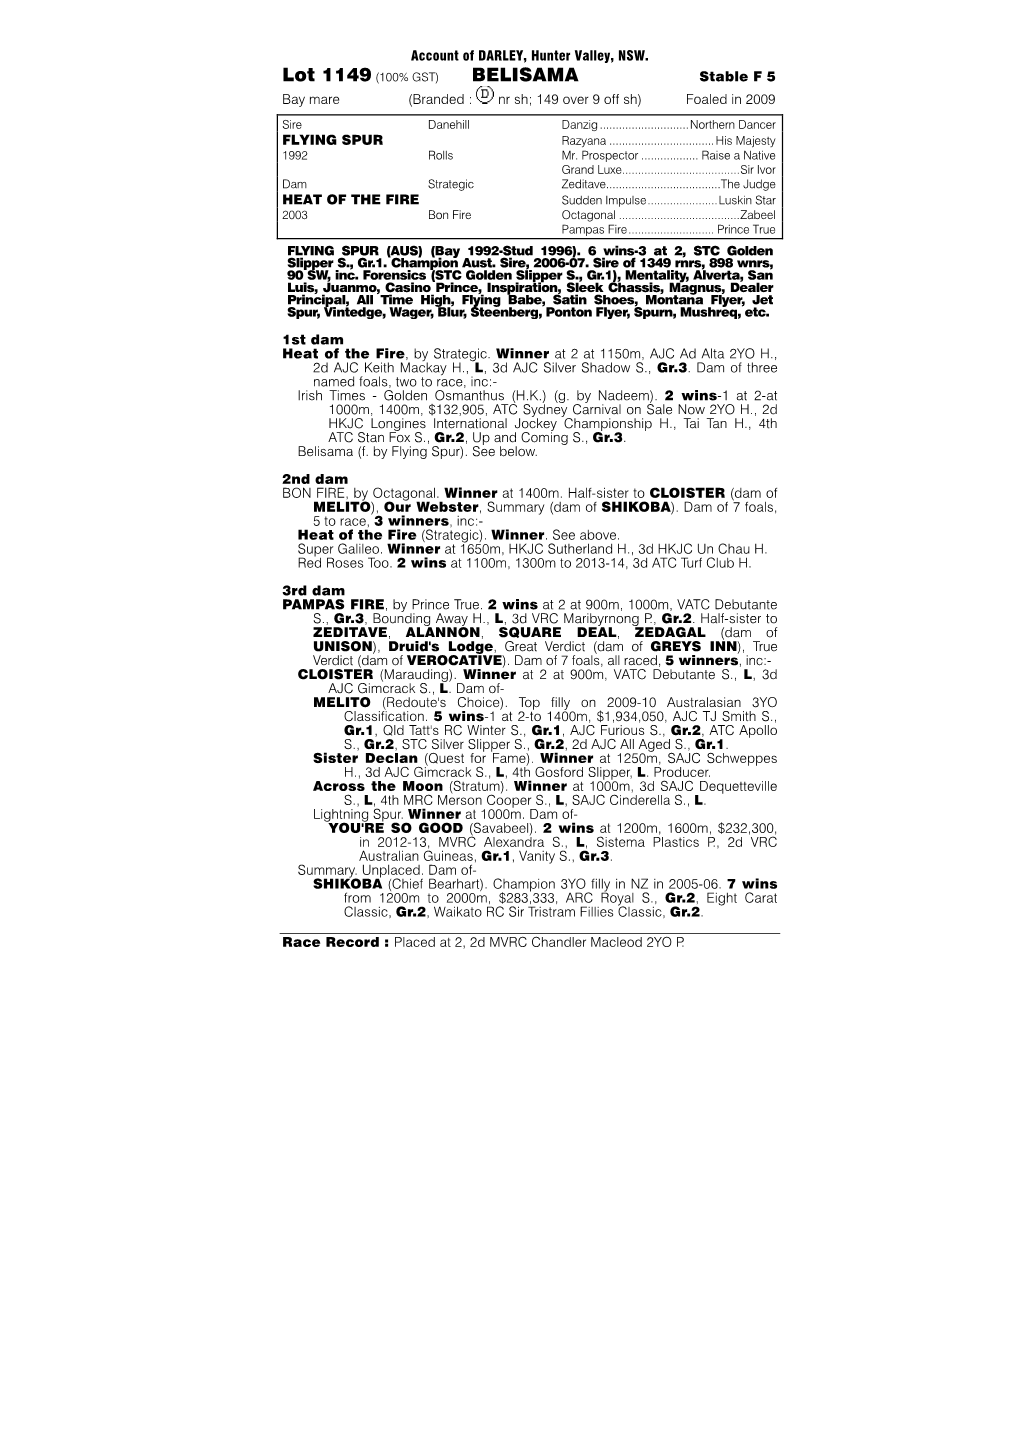 BELISAMA Stable F 5 Bay Mare (Branded : Nr Sh; 149 Over 9 Off Sh) Foaled in 2009